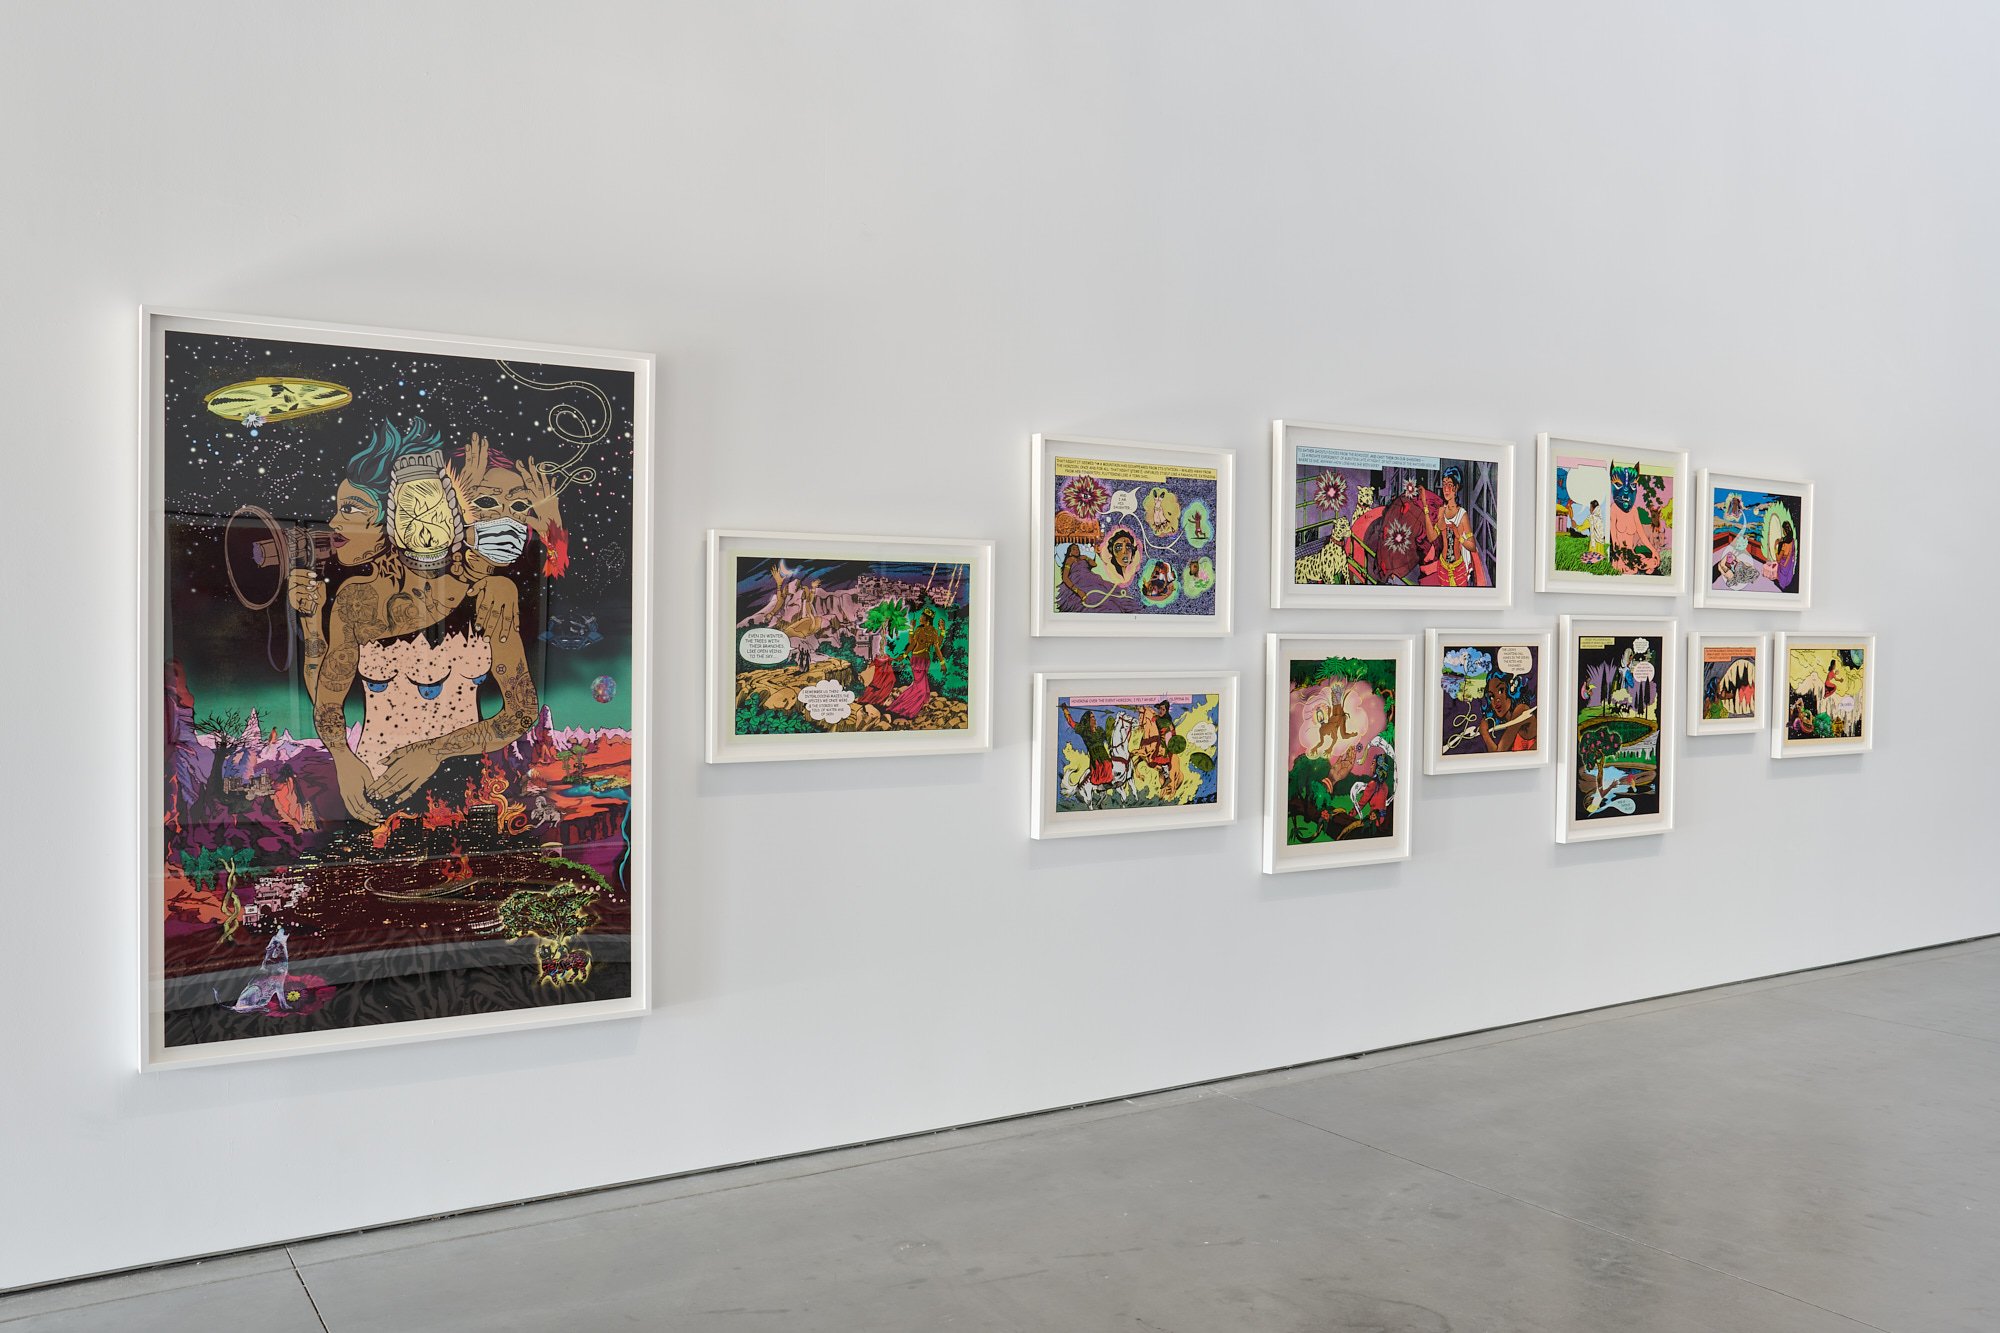  Chitra Ganesh,  Multiverse Dreaming , suite of twelve LightJet prints on archival paper, 2021. Installation view,  Three Fates , Gallery Wendi Norris Offsite Exhibition, San Francisco, CA, 2022. Photo credit: J. Arnold, Impart Photography 